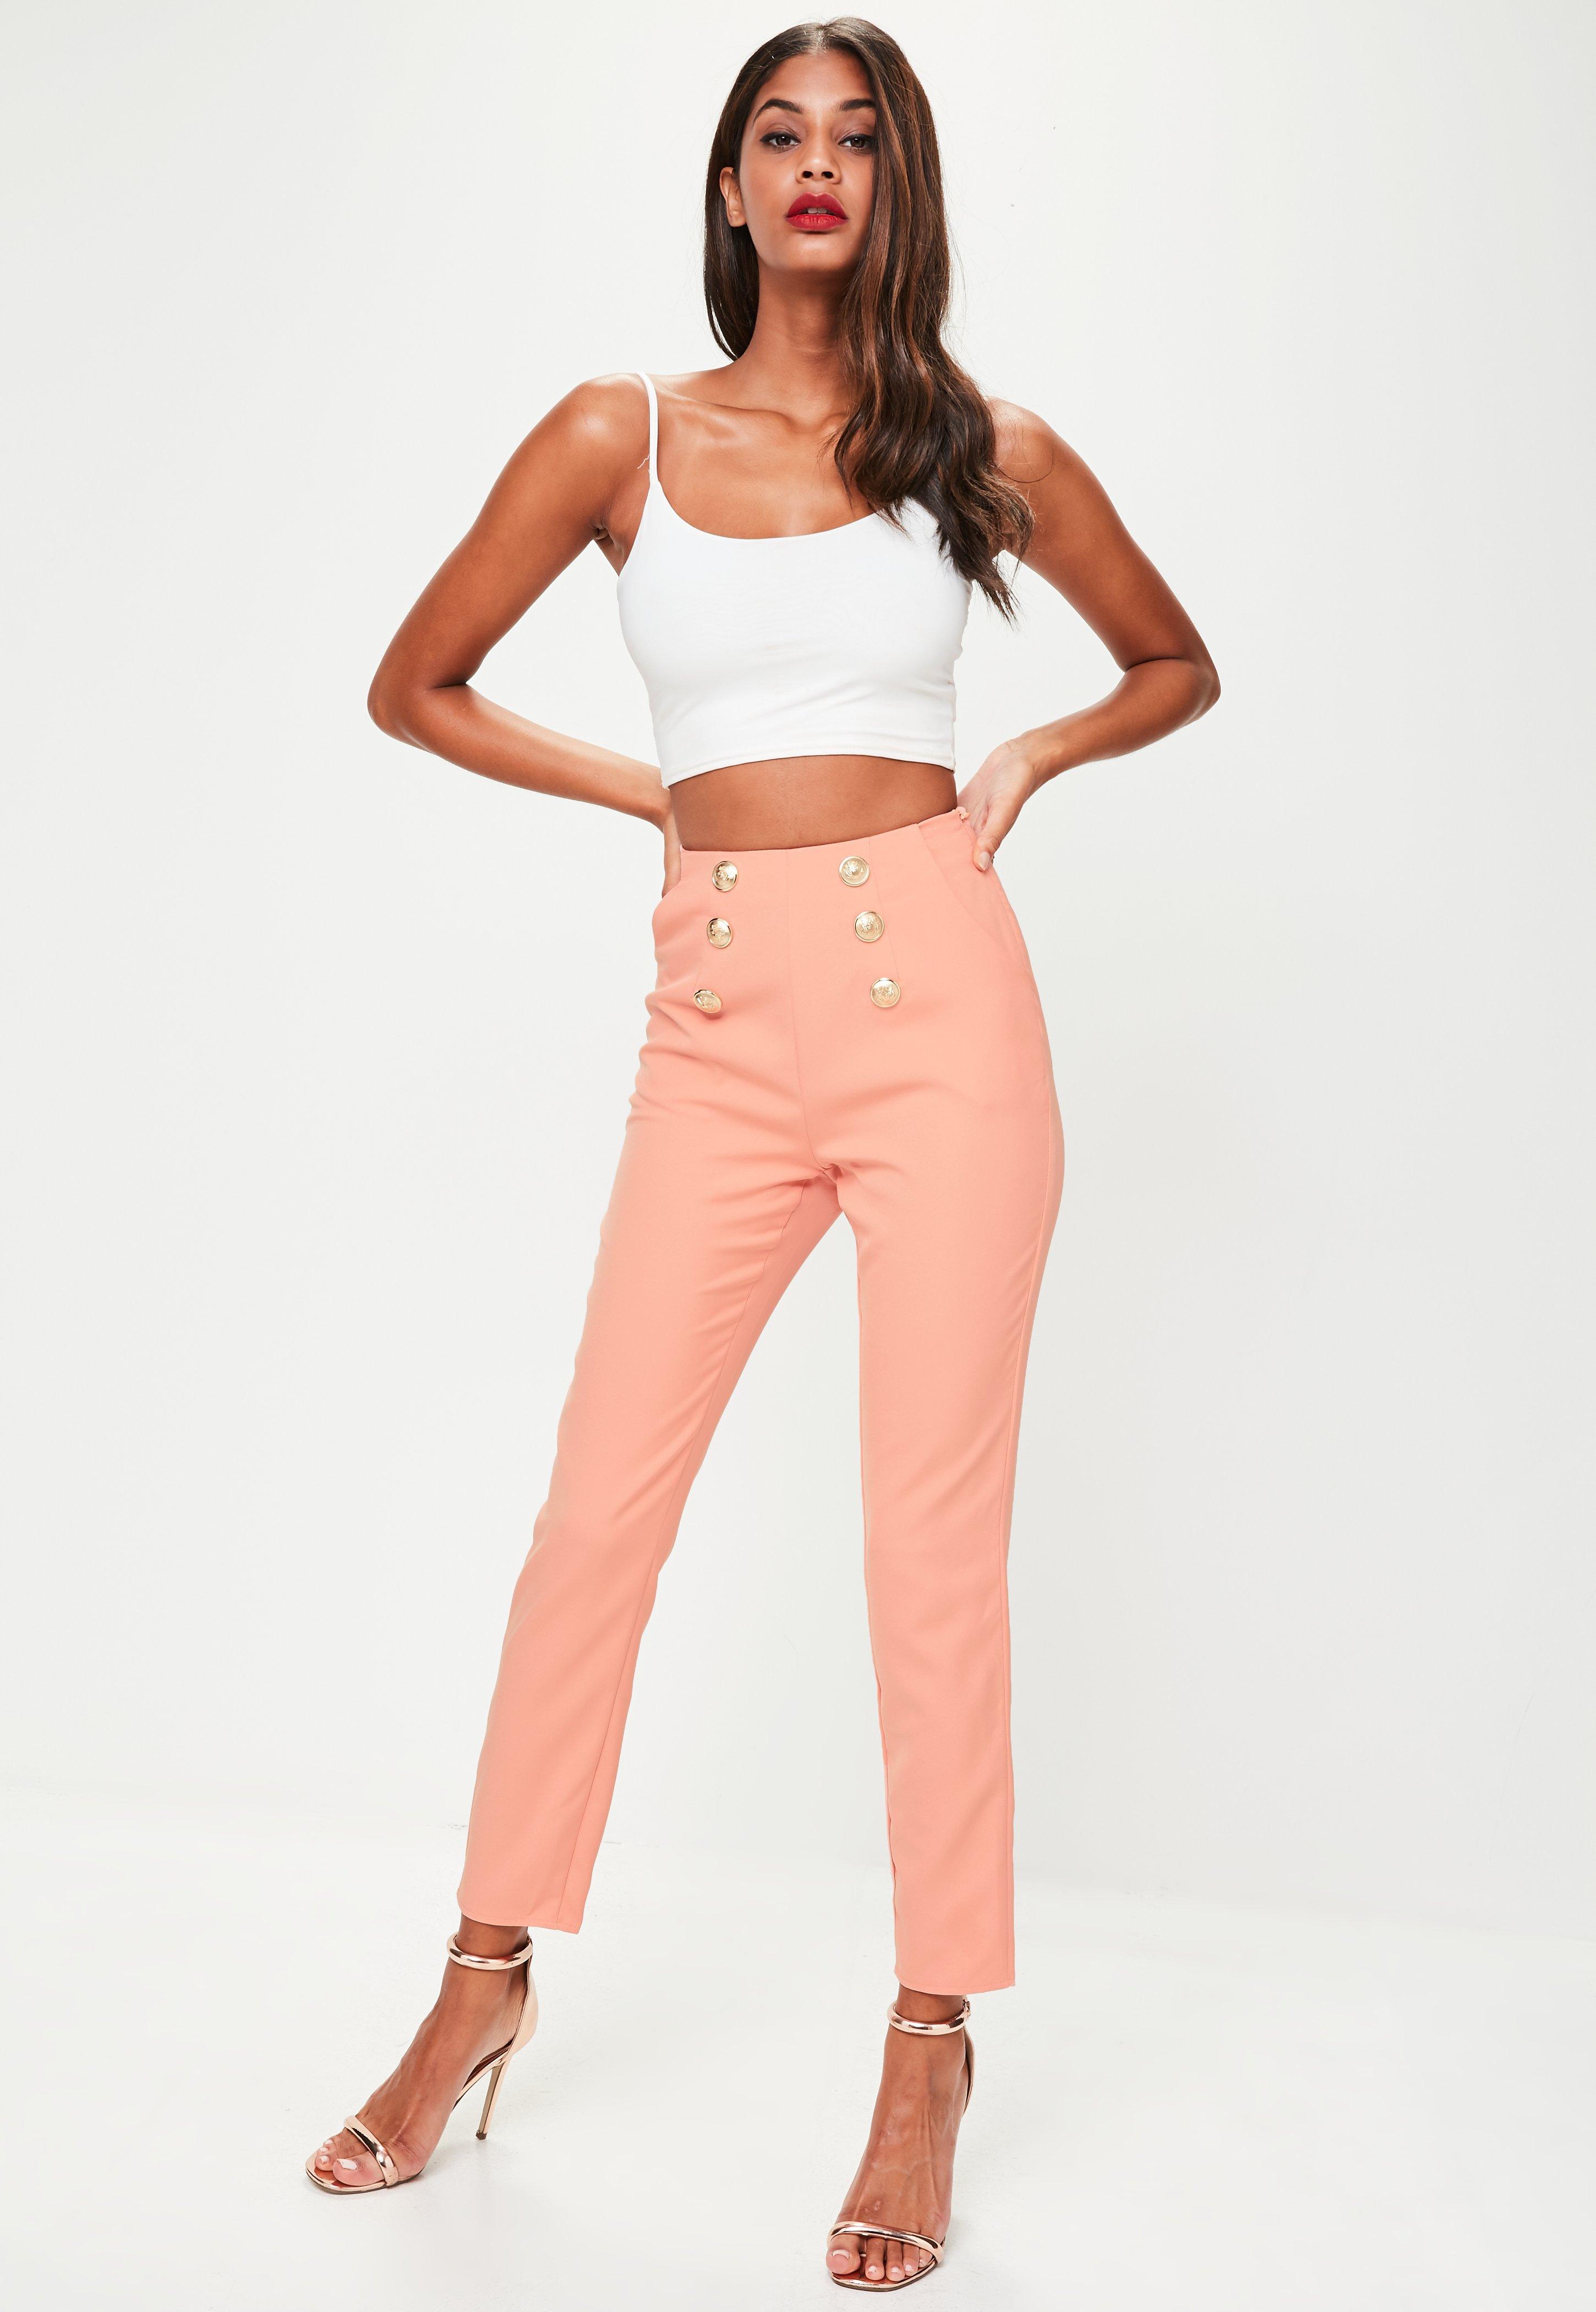 Lyst - Missguided Nude Military High Waisted Pants in Natural